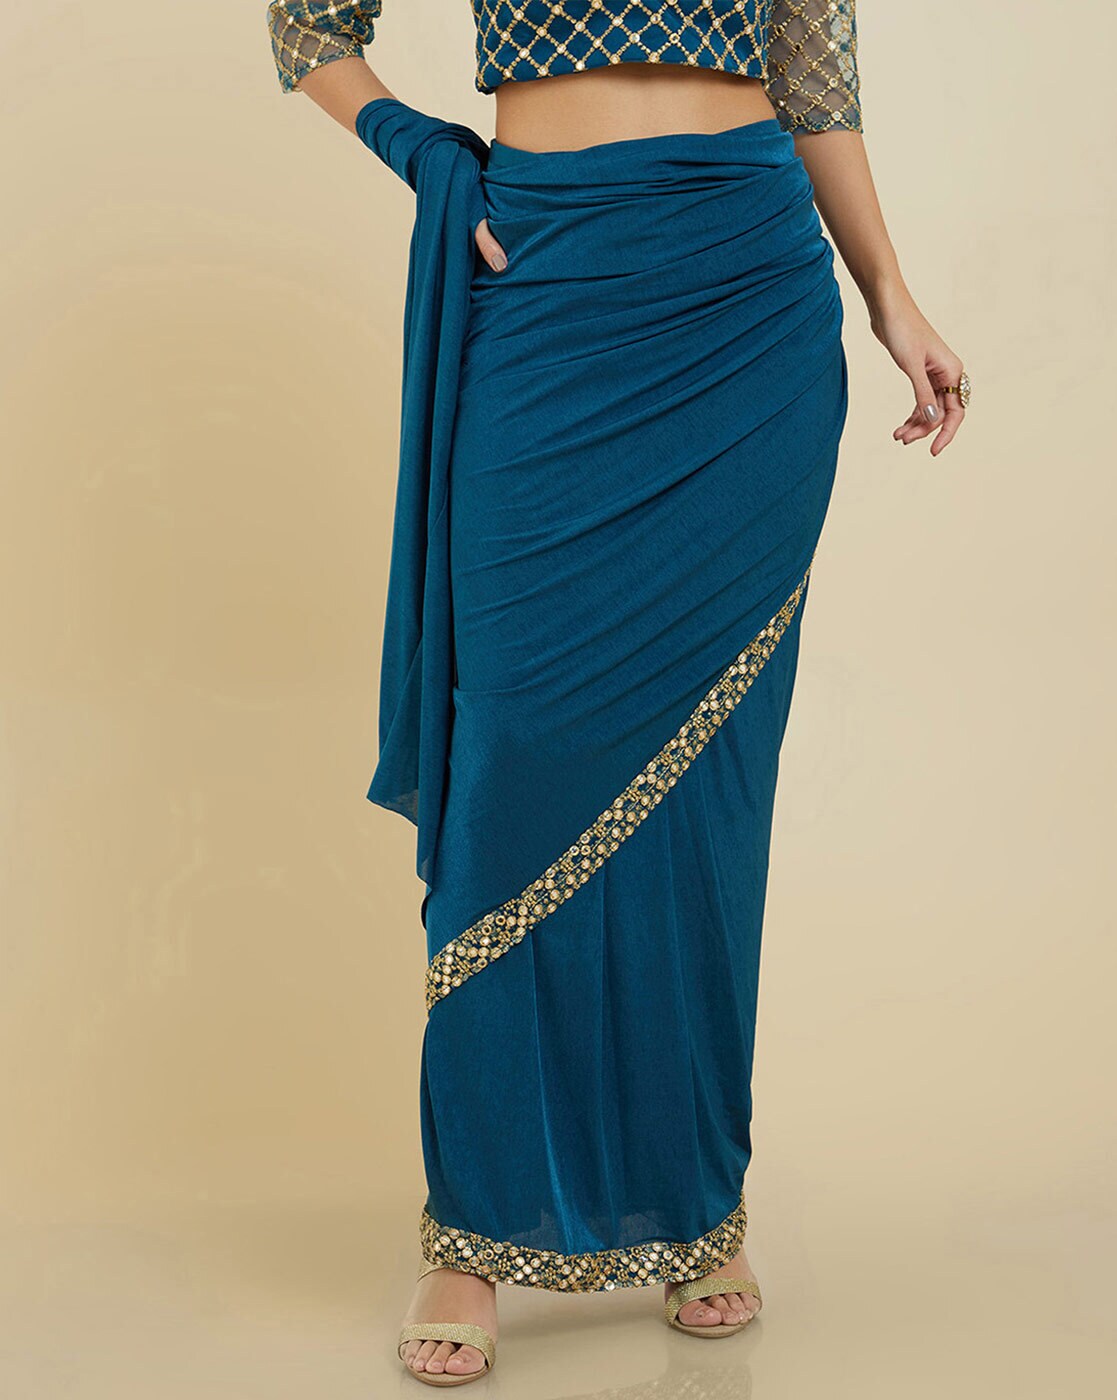 Shop Teal Hosiery Saree Shaper Collection Online at Soch India